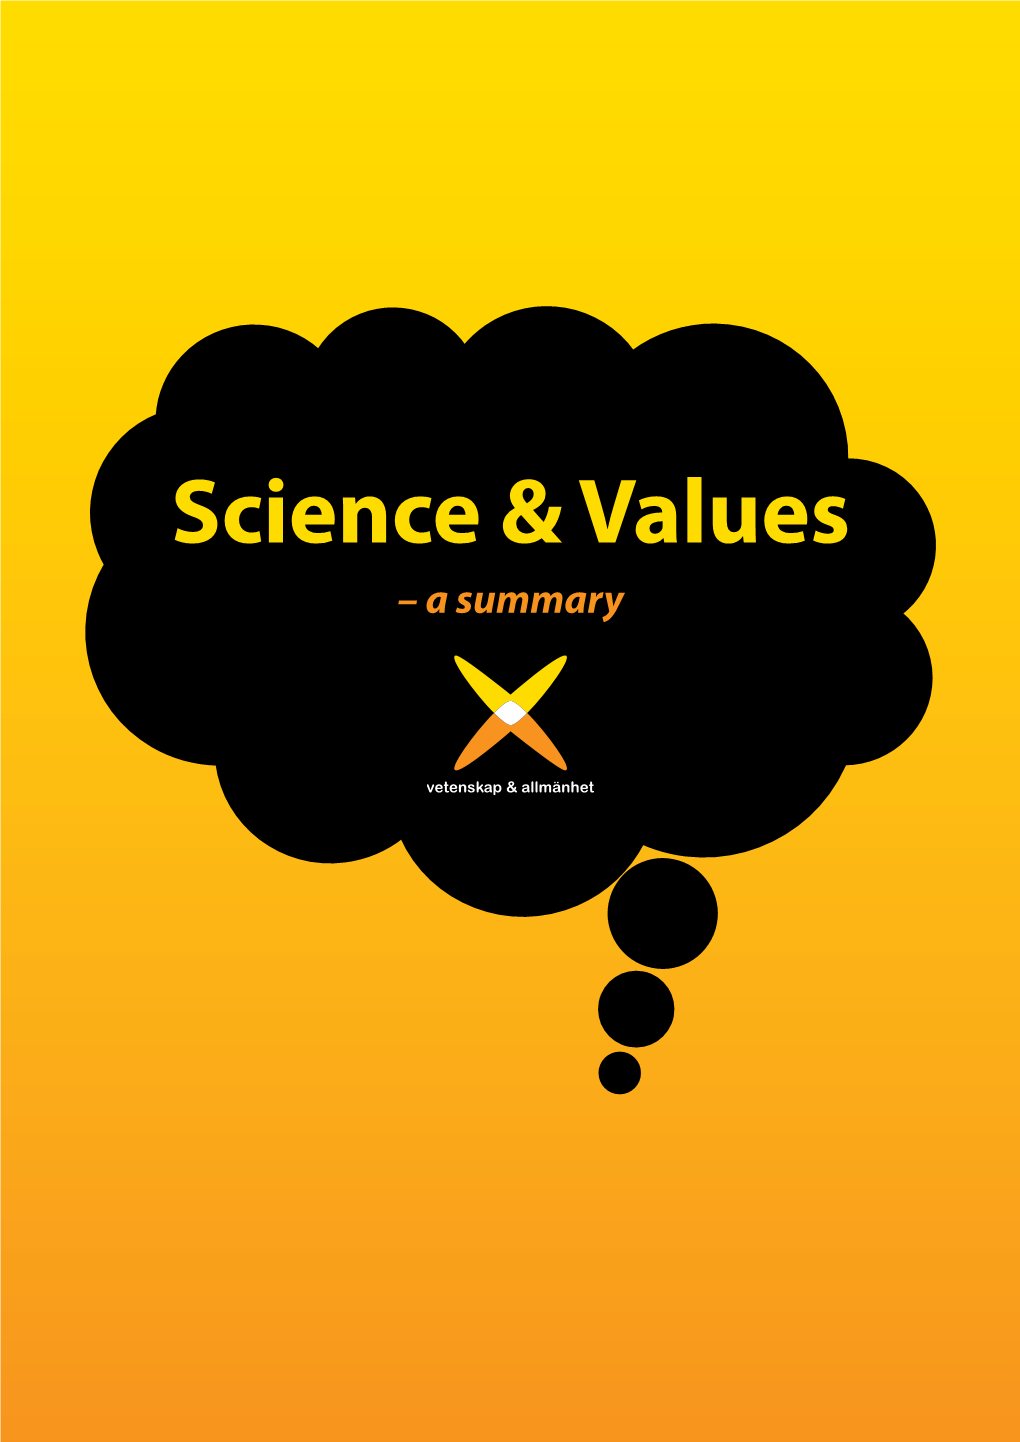 Science & Values